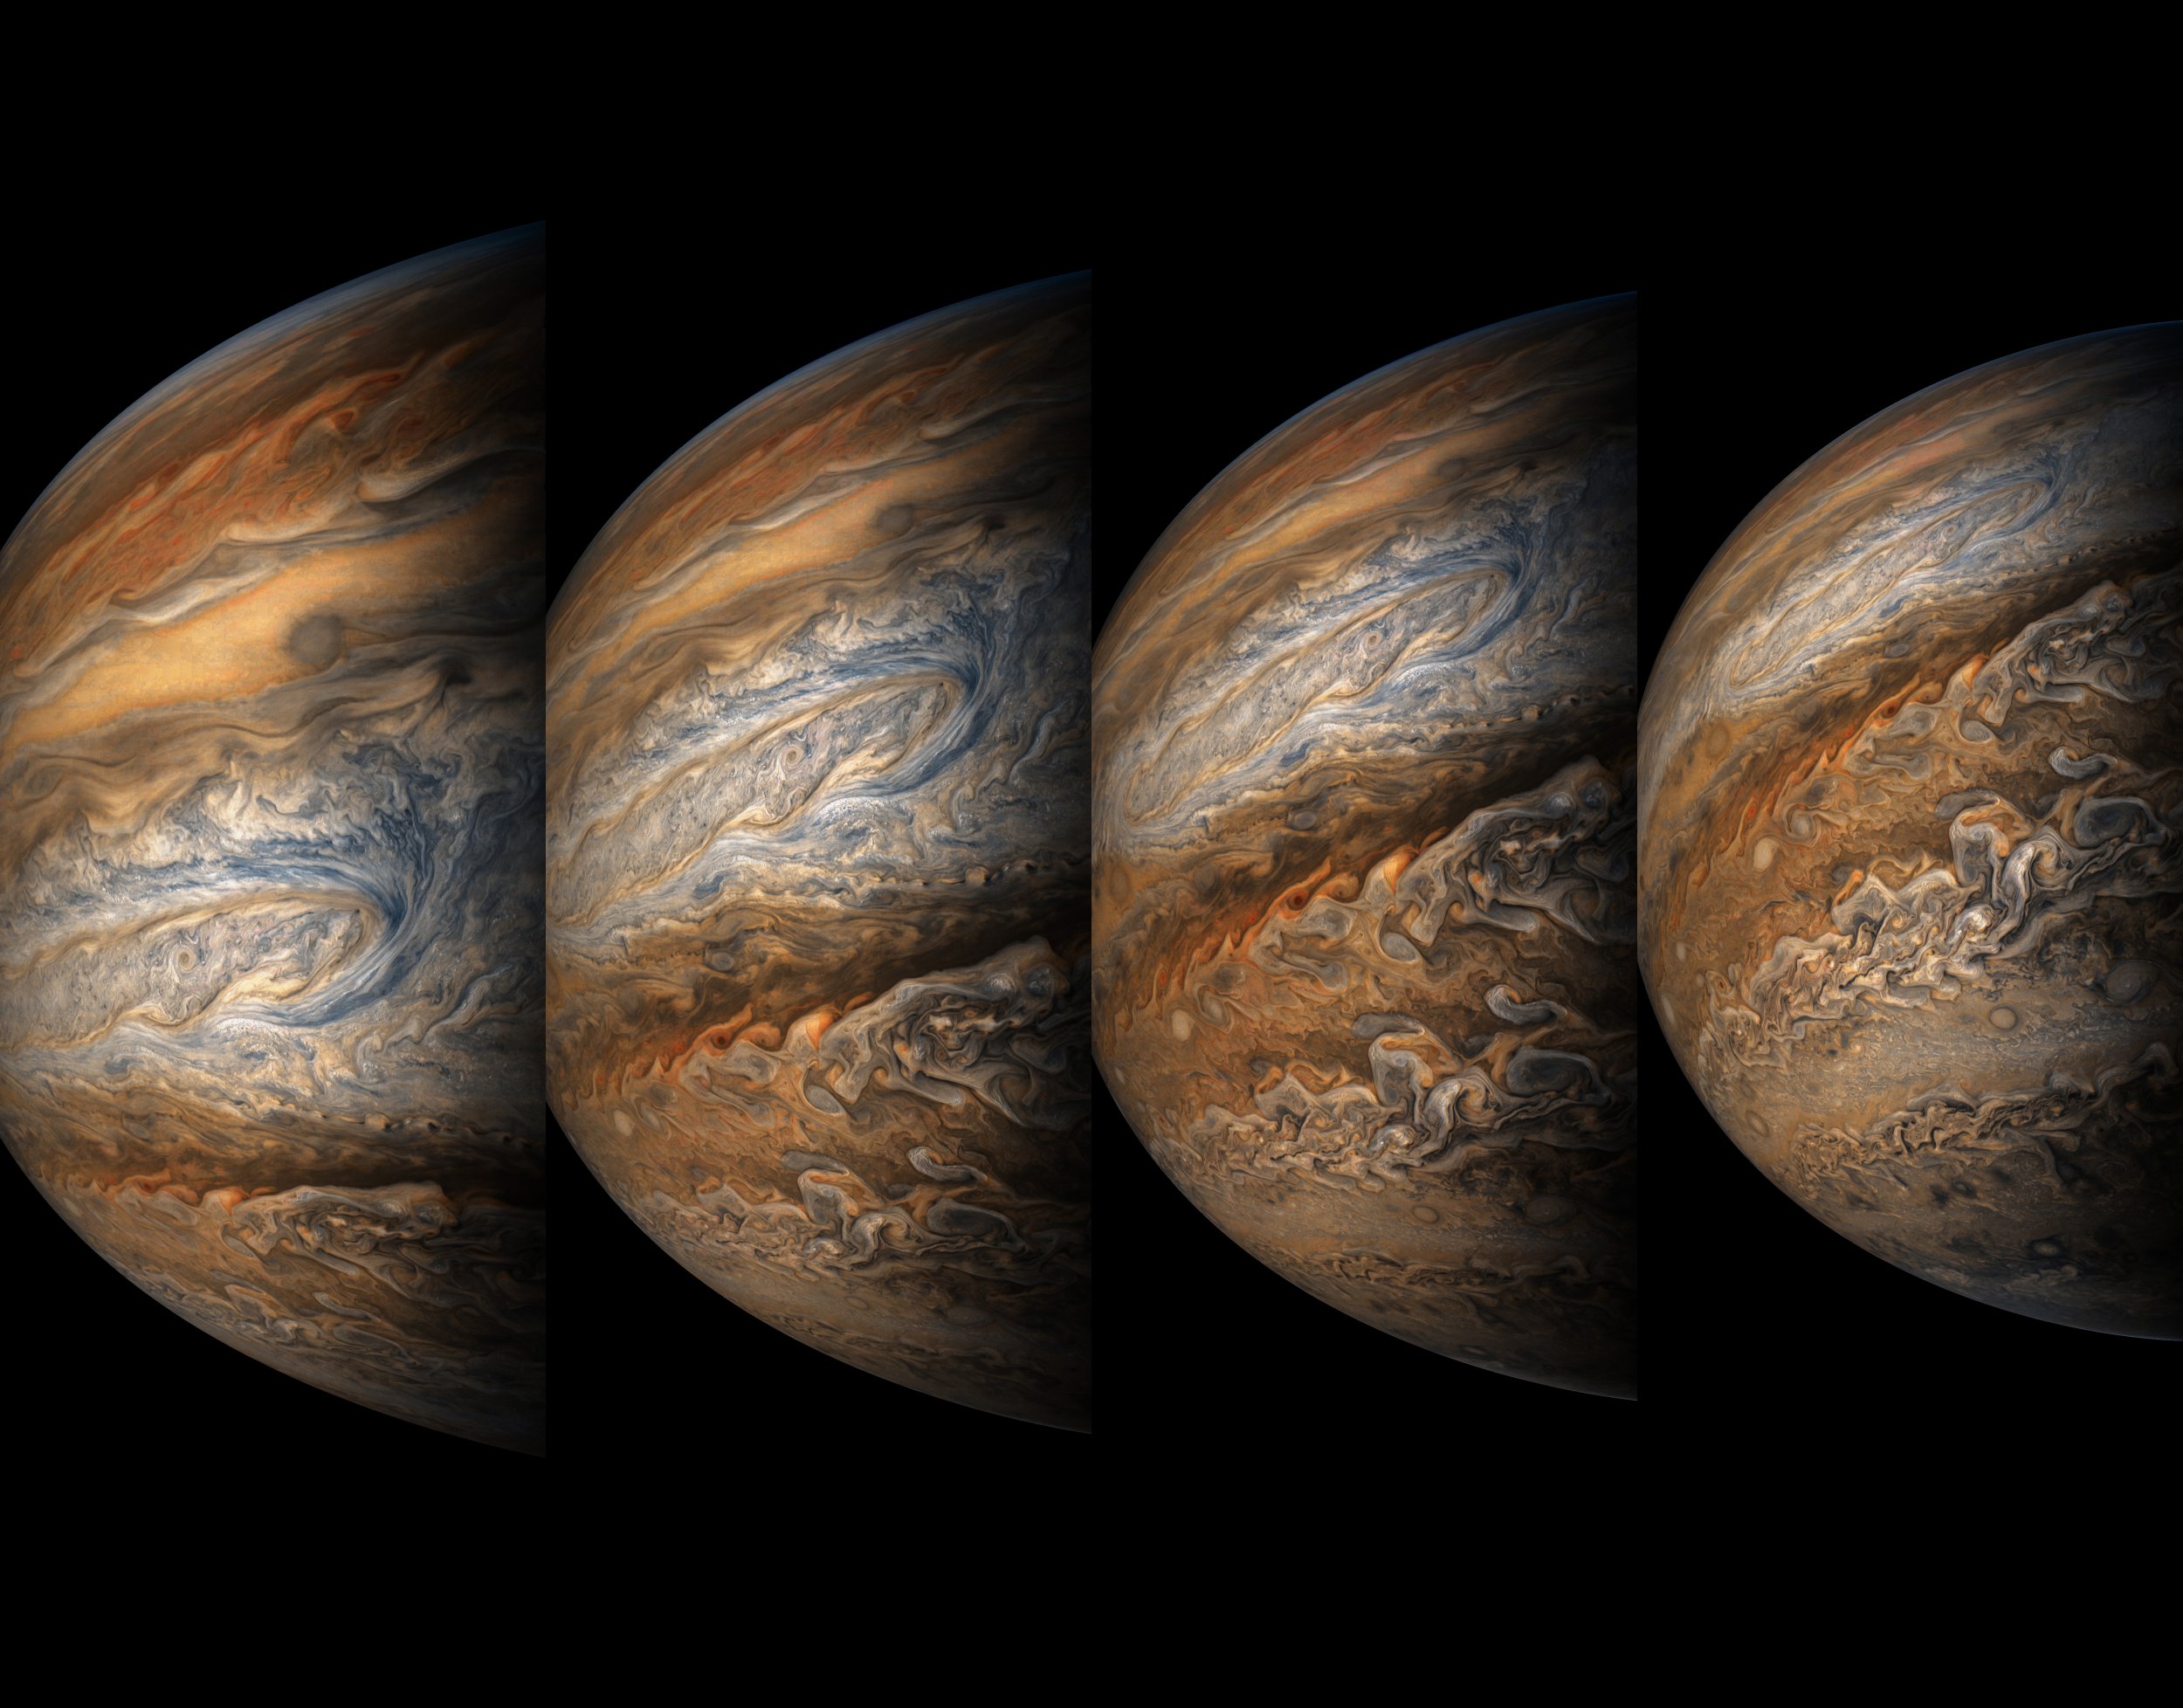 8th approach of jupiter by Juno